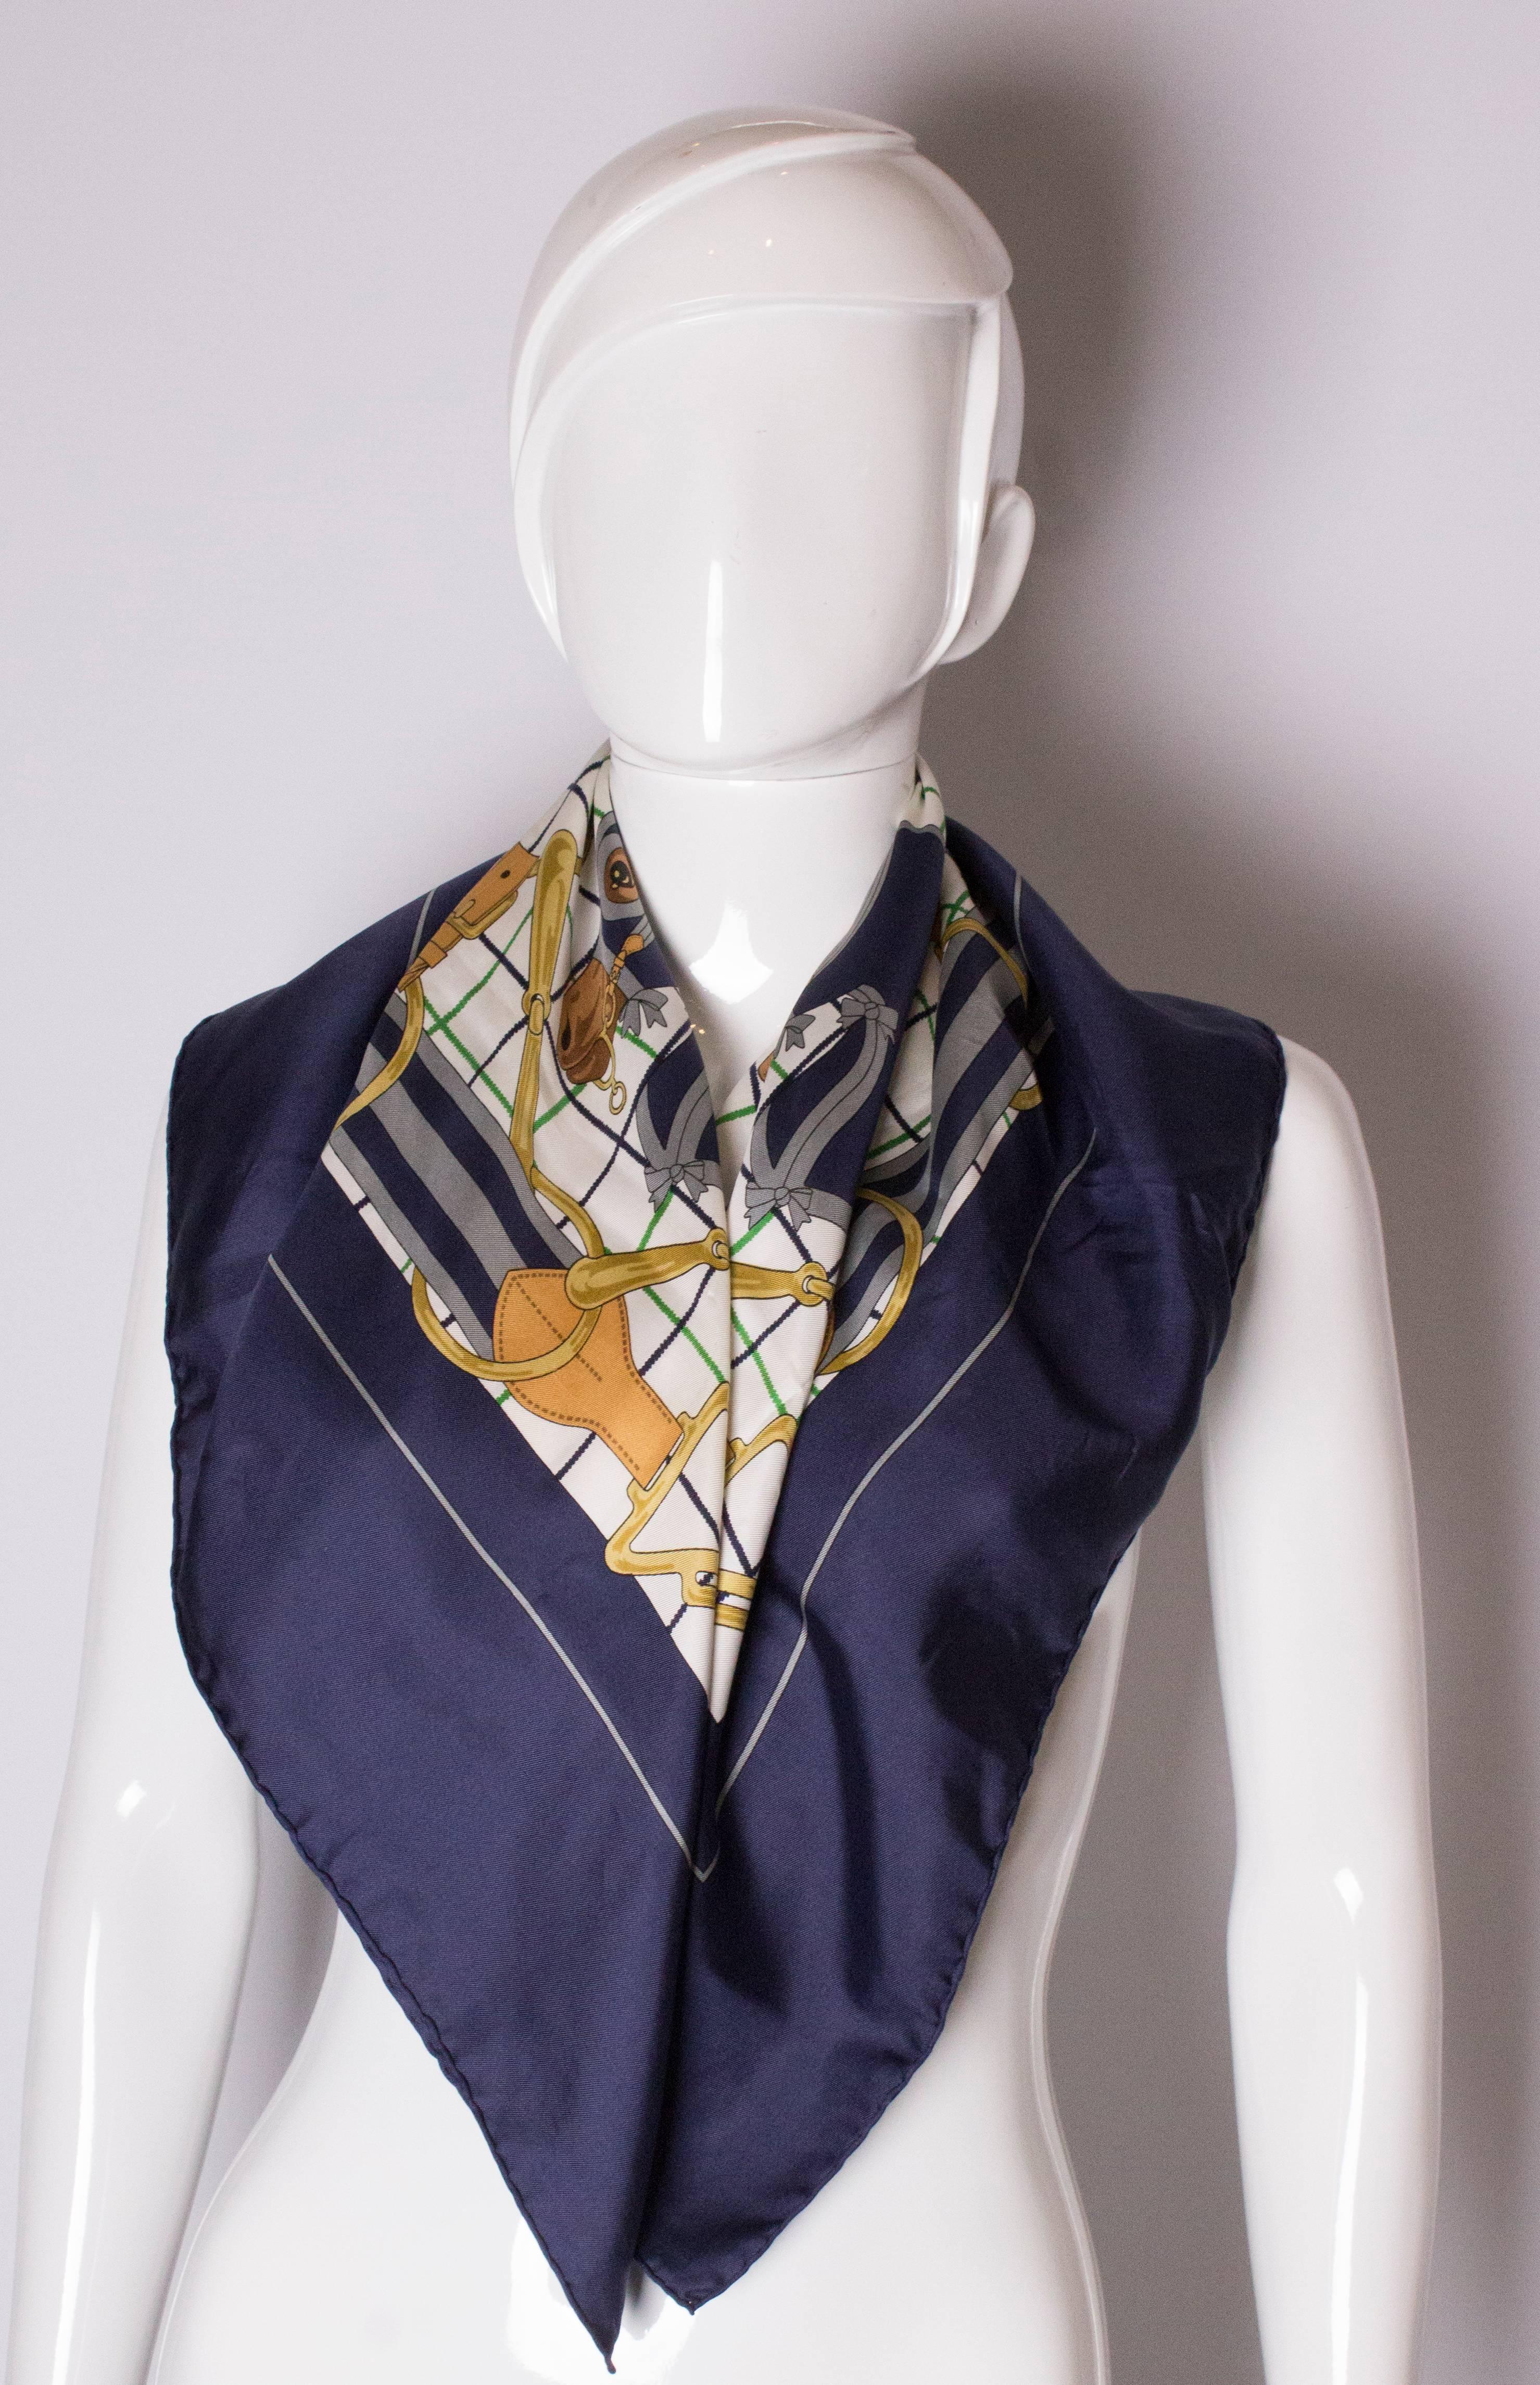 Vintage Silk  Scarf by Hermes, Selliers design. The scarf has a blue border and blue gold and green design.